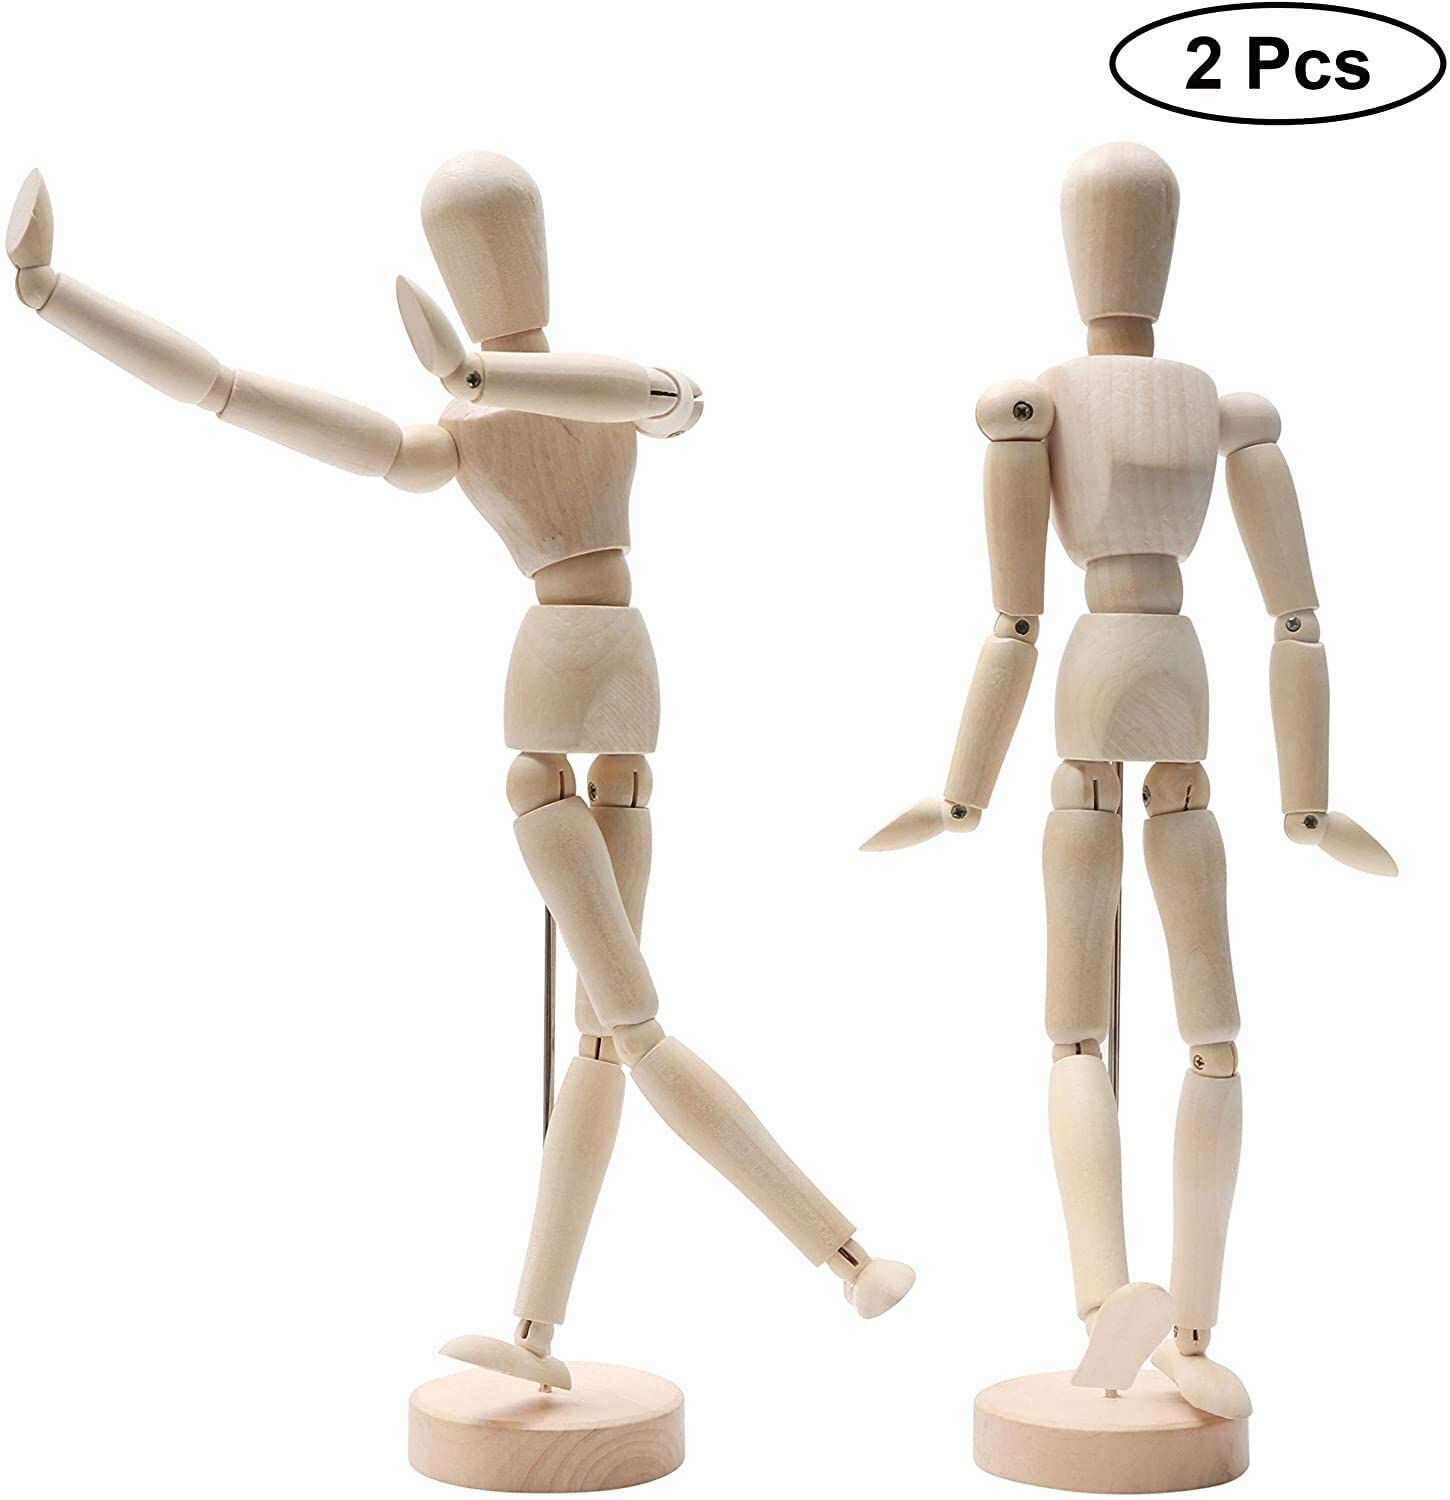 Artists Manikin Art Mannequin Figures Supplies Drawing Tools,Small Drawing  Figure Model for Sketching, Painting, Artists Male+Female Set